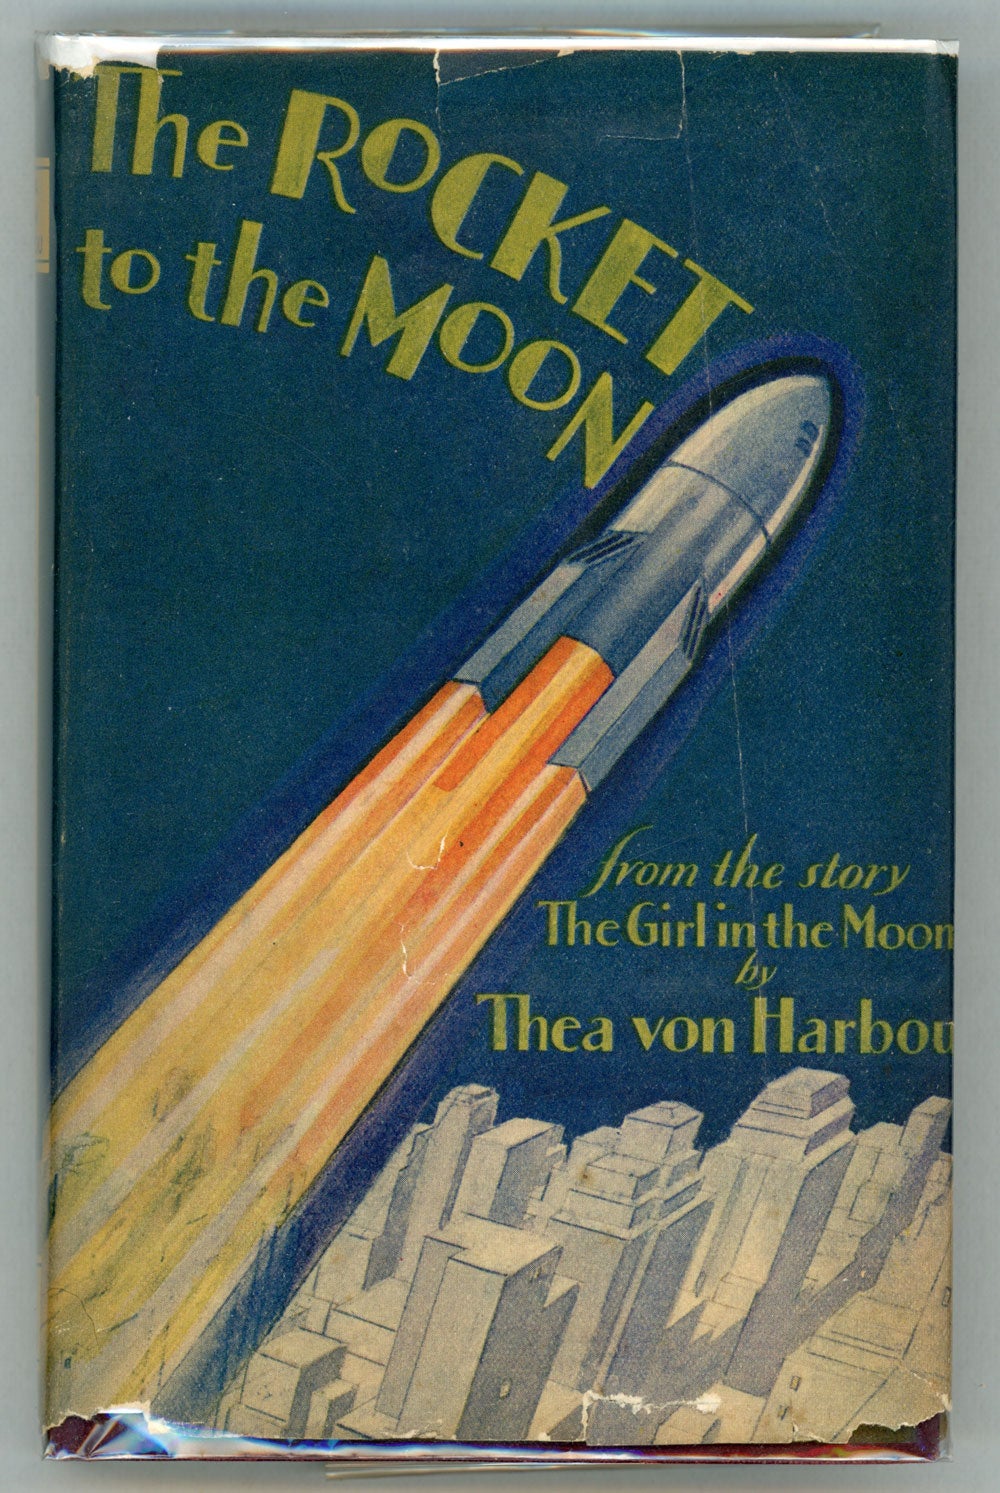 Over the Moon: The Novelization